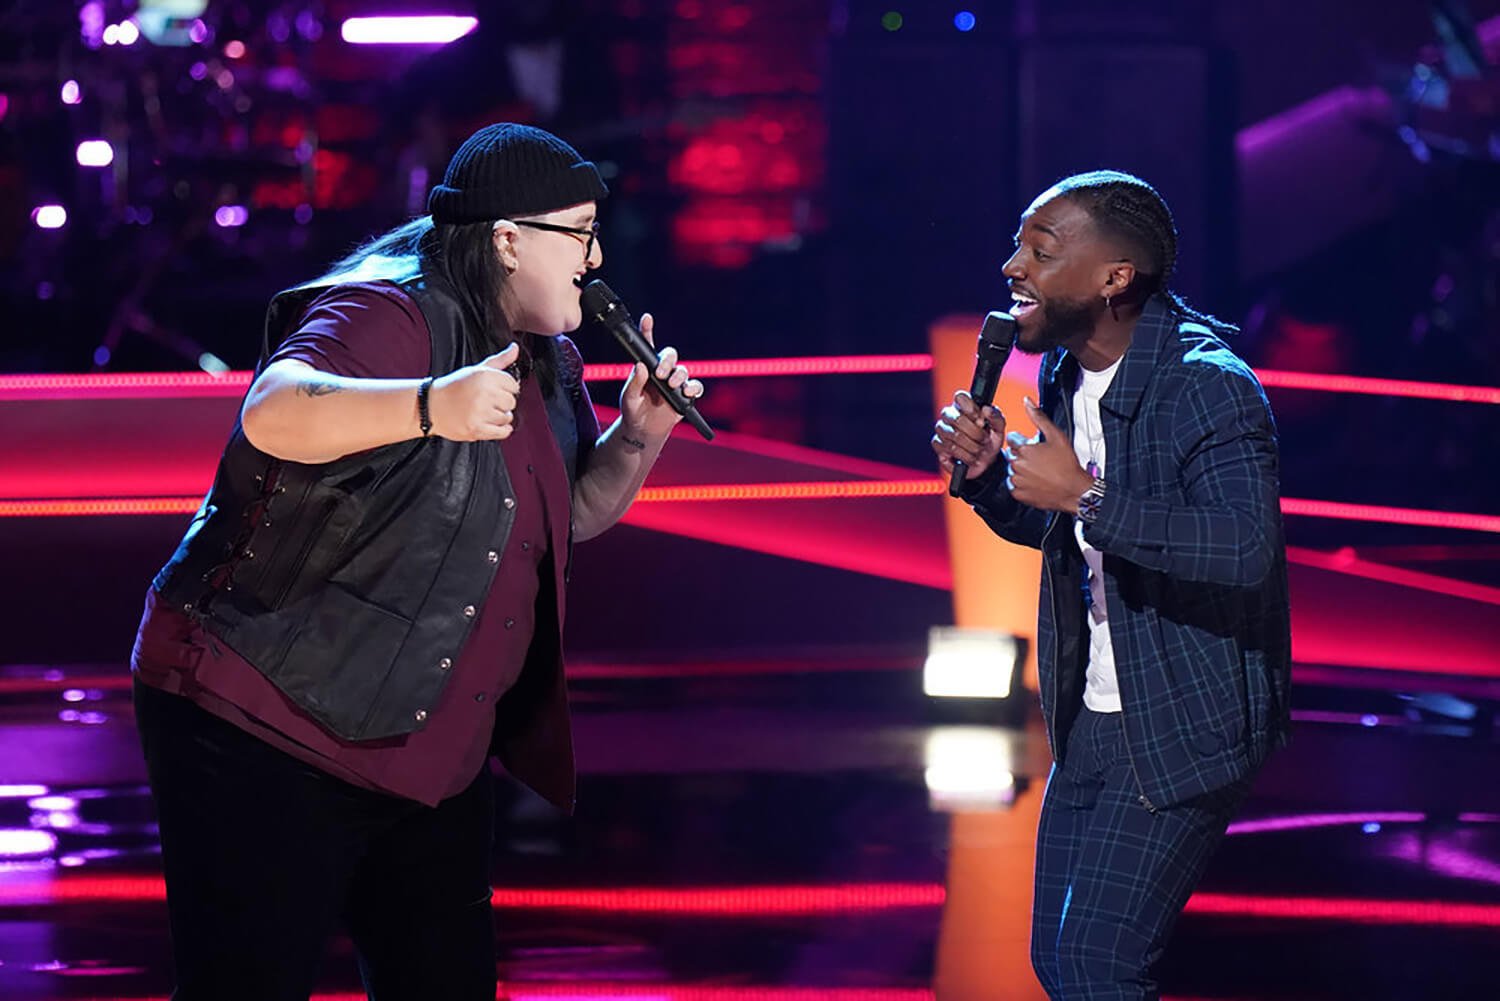 ‘The Voice’ Season 23’s Playoff Pass Has a Major Flaw